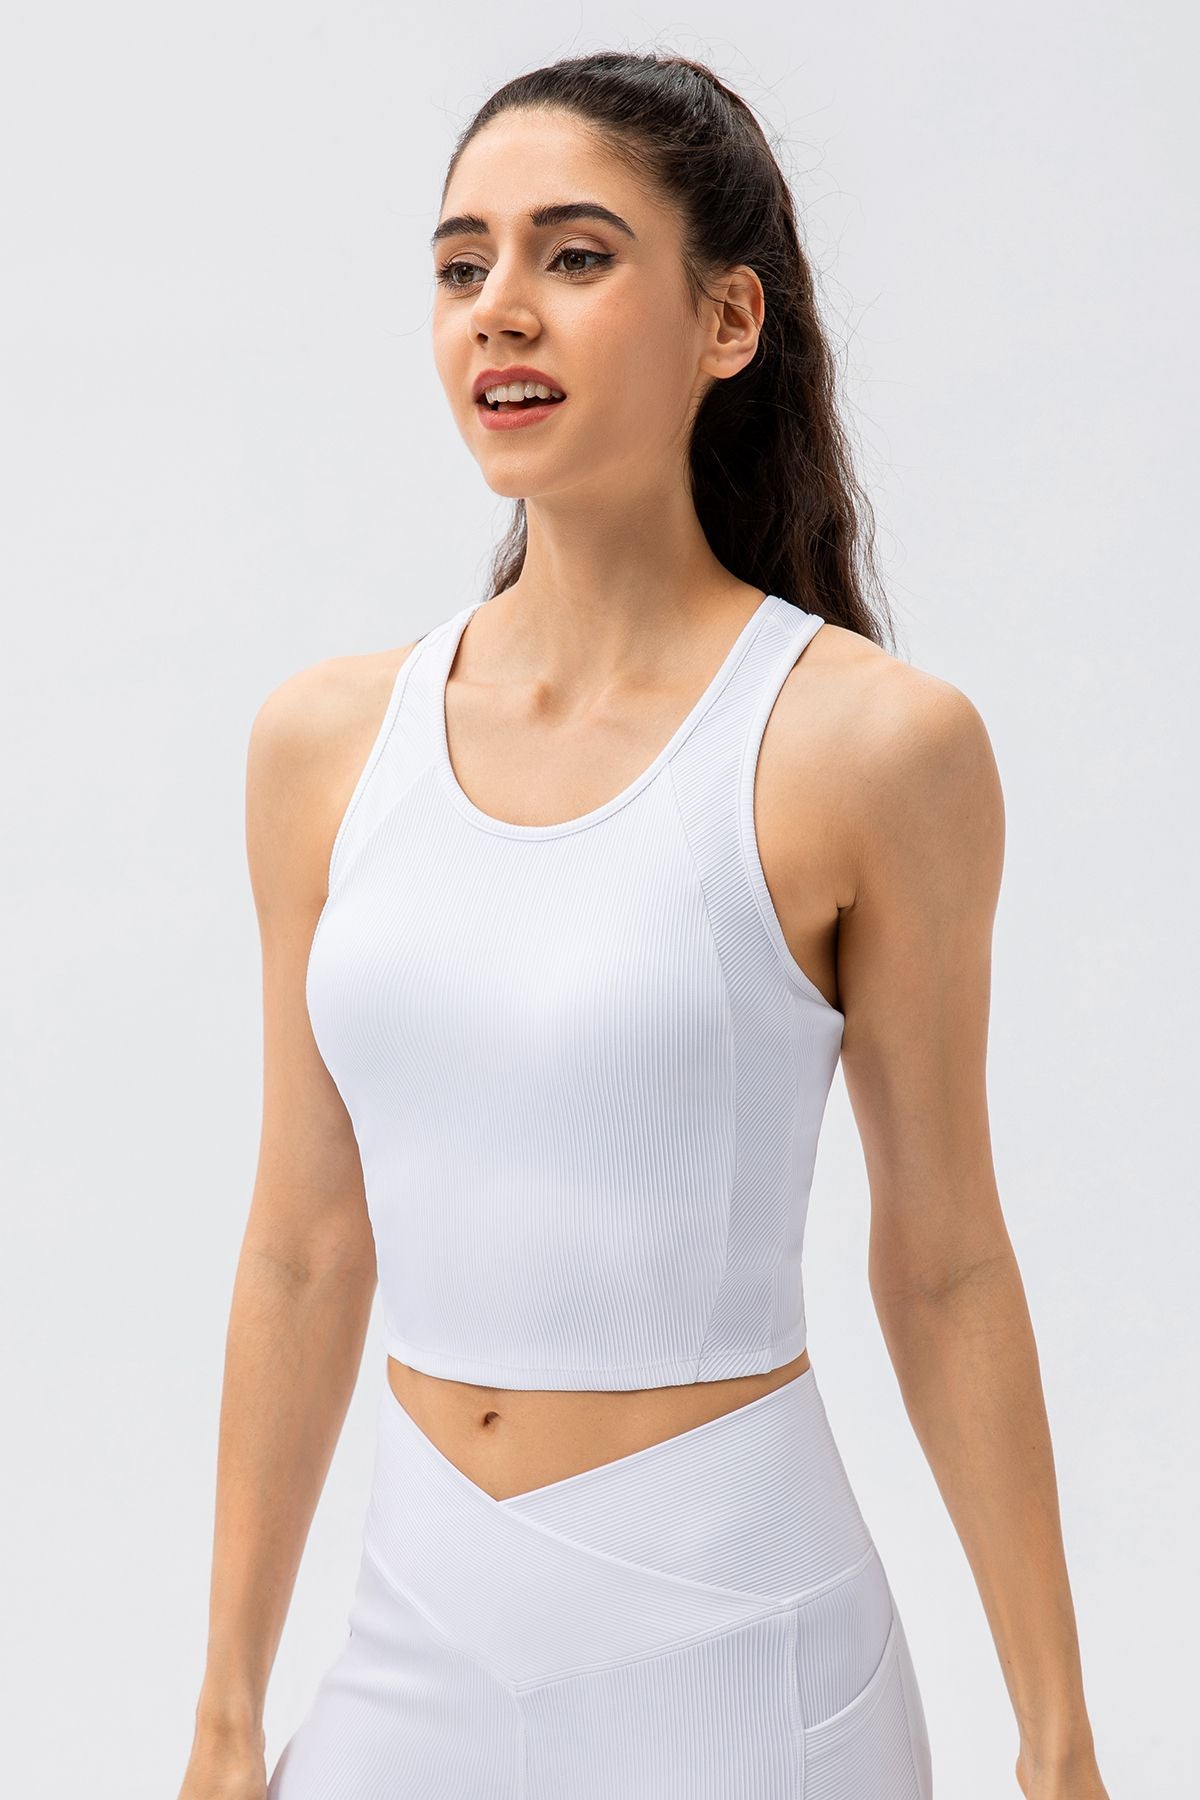 Ribbed All-In-One Cropped Tank Tops with Built-in Shelf Bra for